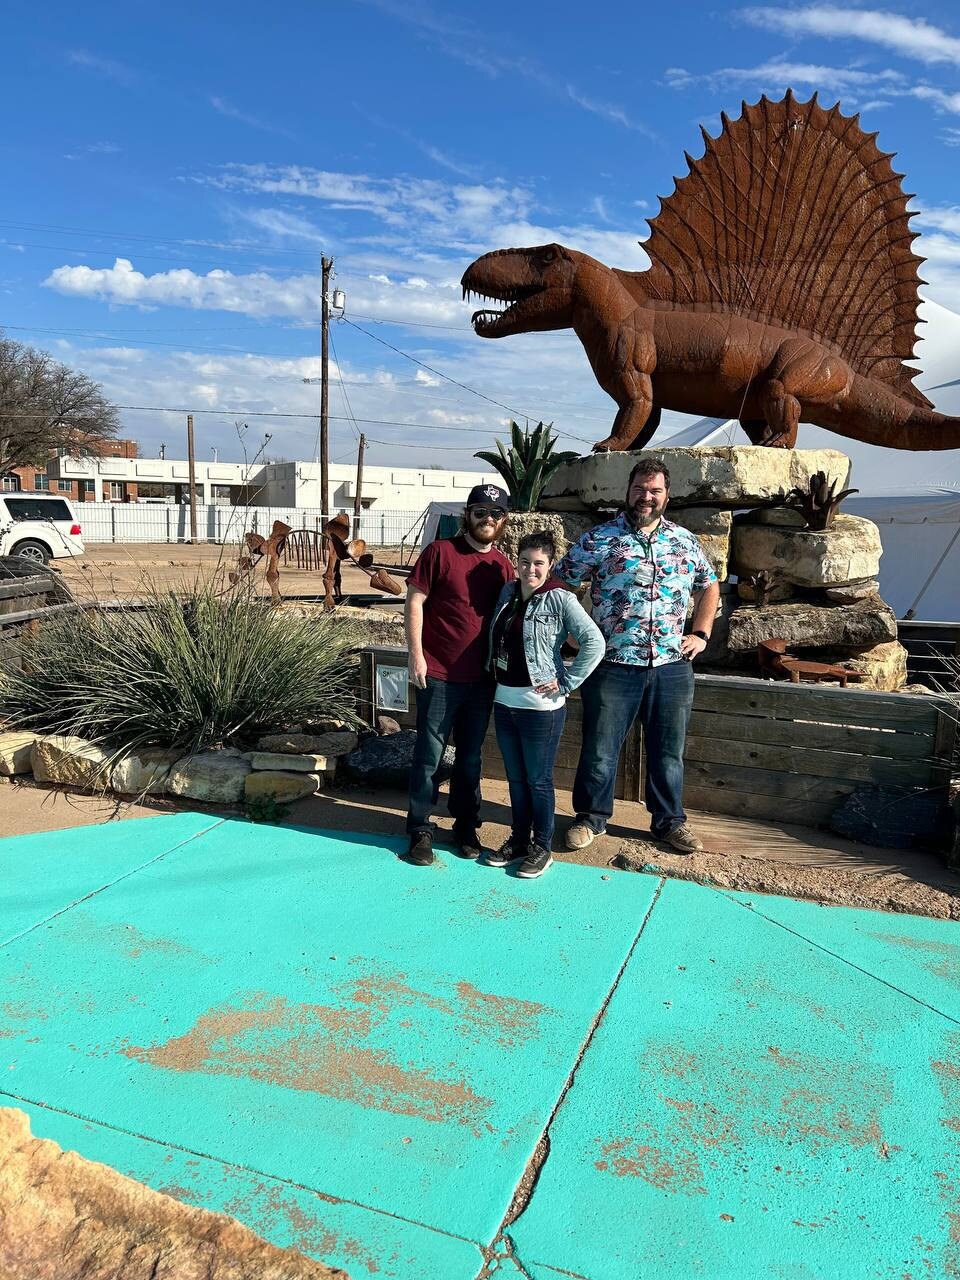 Me, Zack, and Jimmy at the Dimetrodon statue in front of the museum.